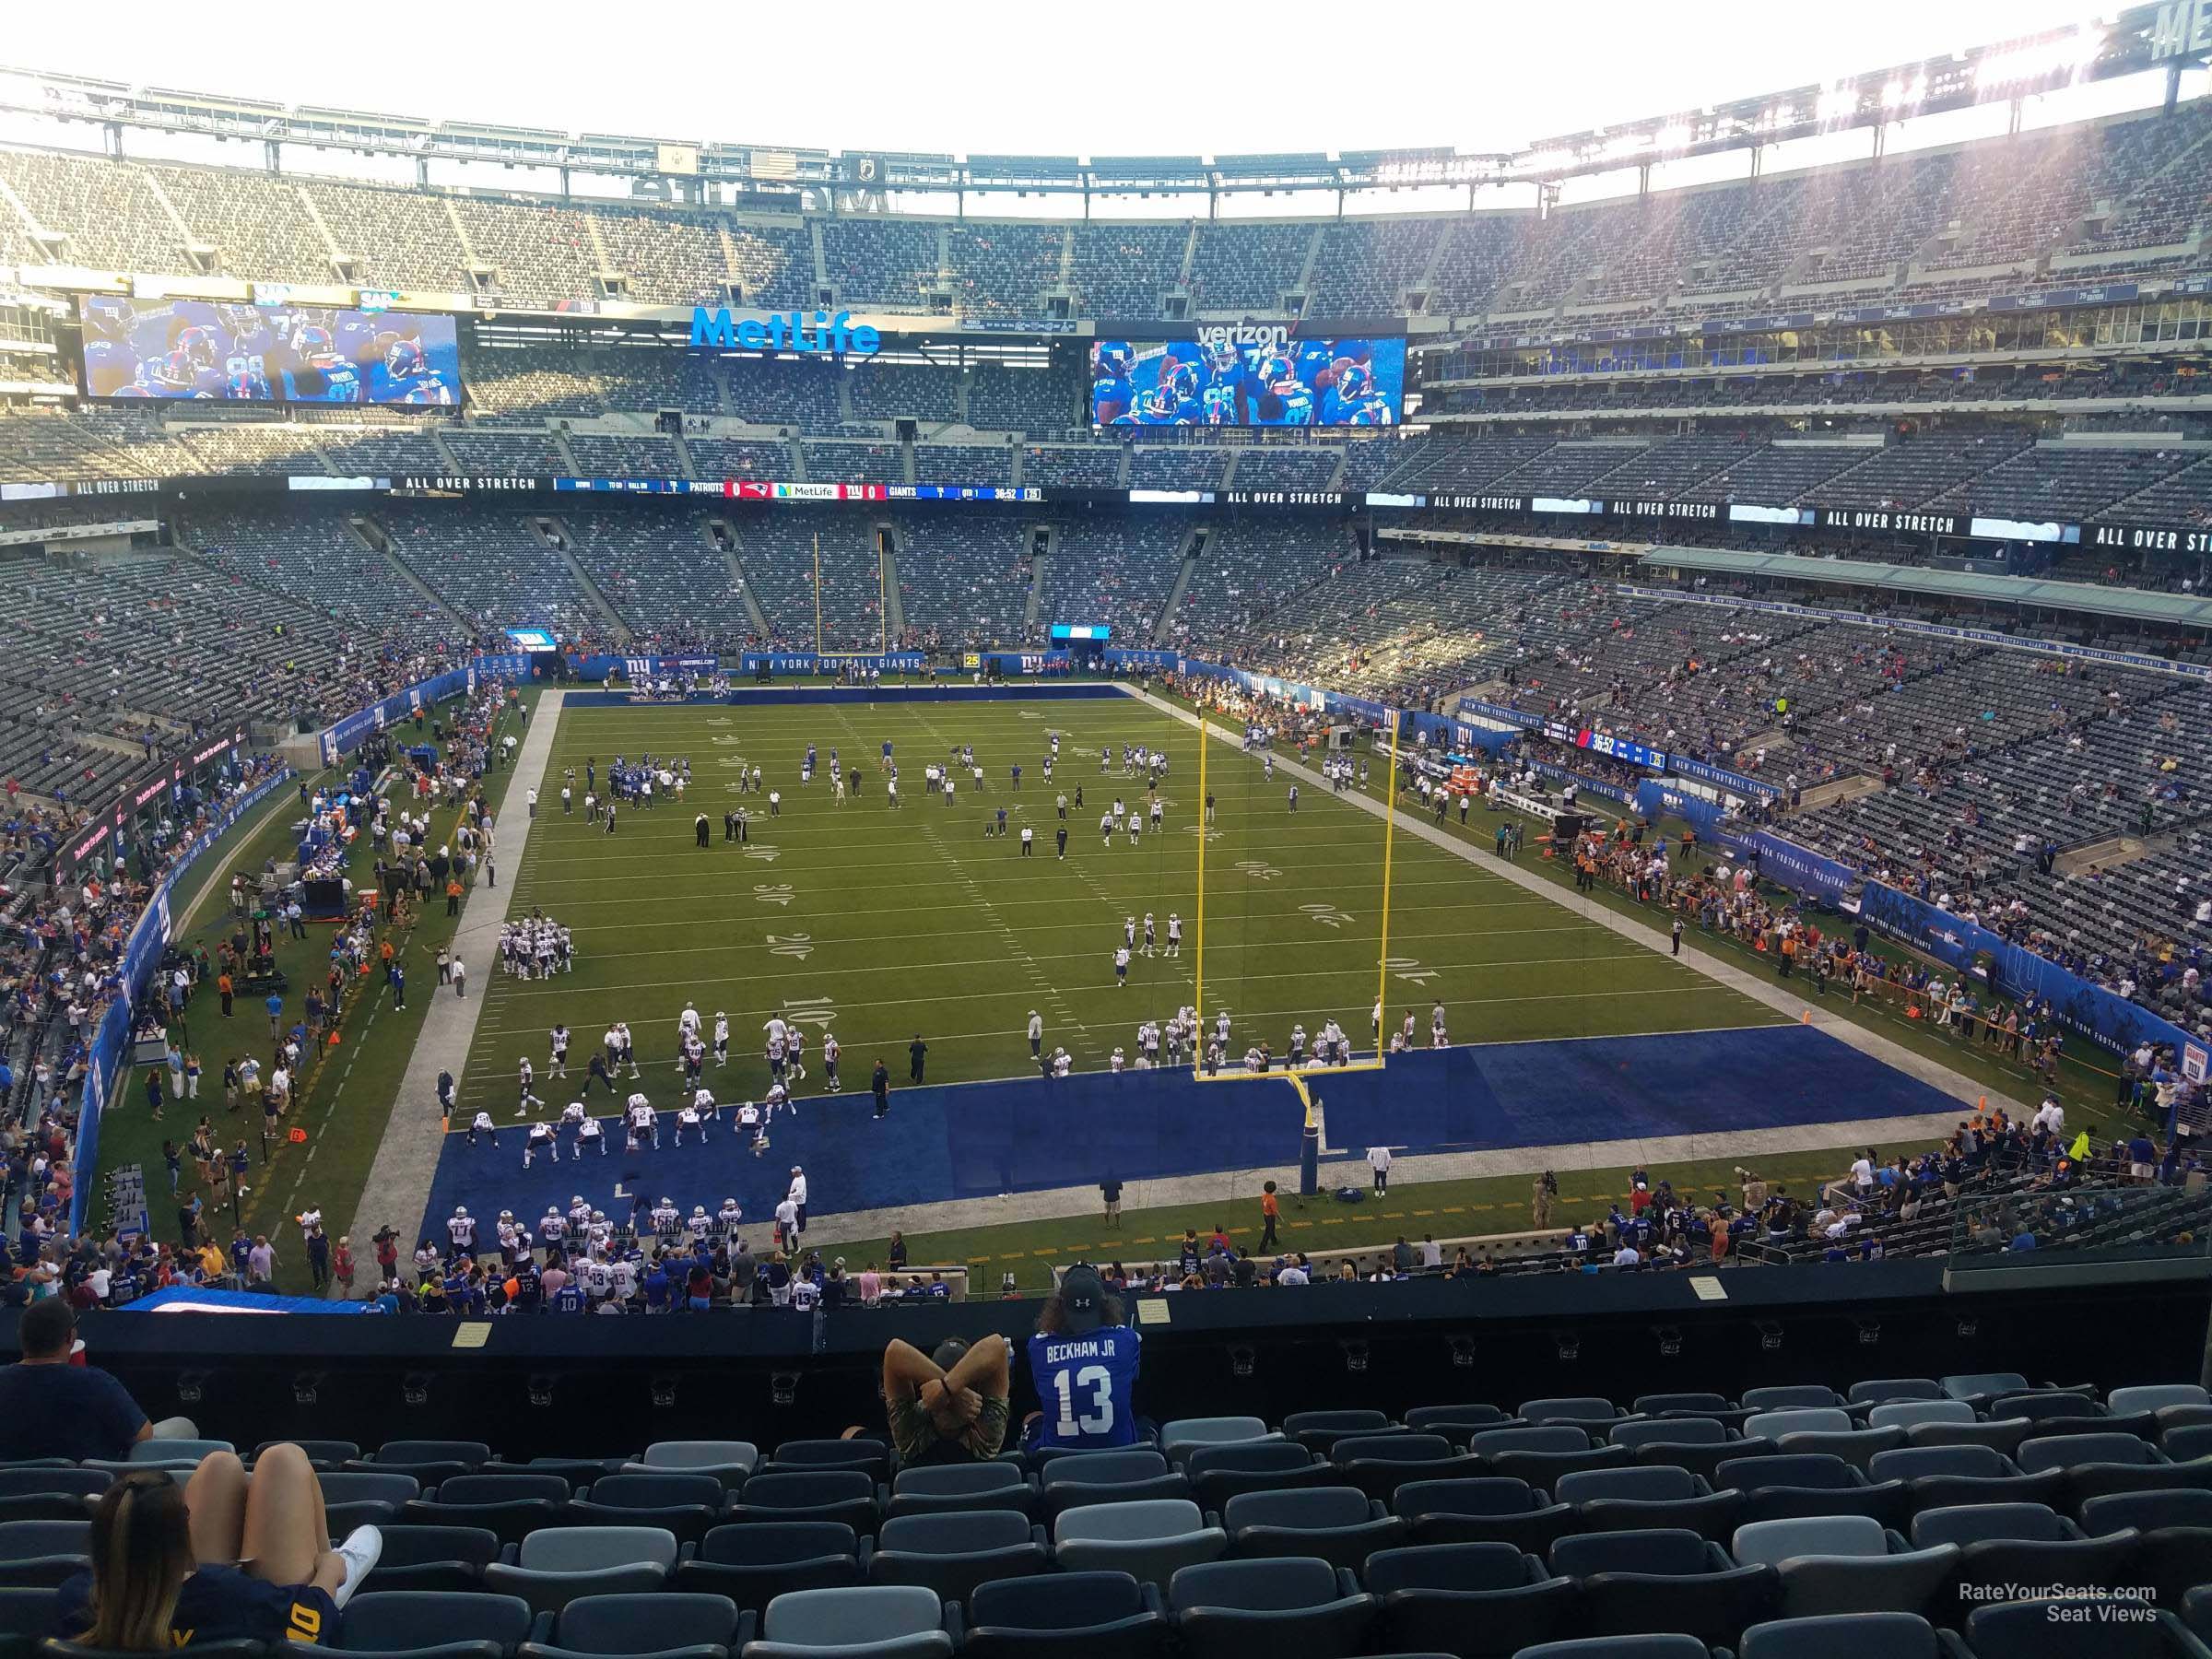 section 203a, row 10 seat view  for football - metlife stadium